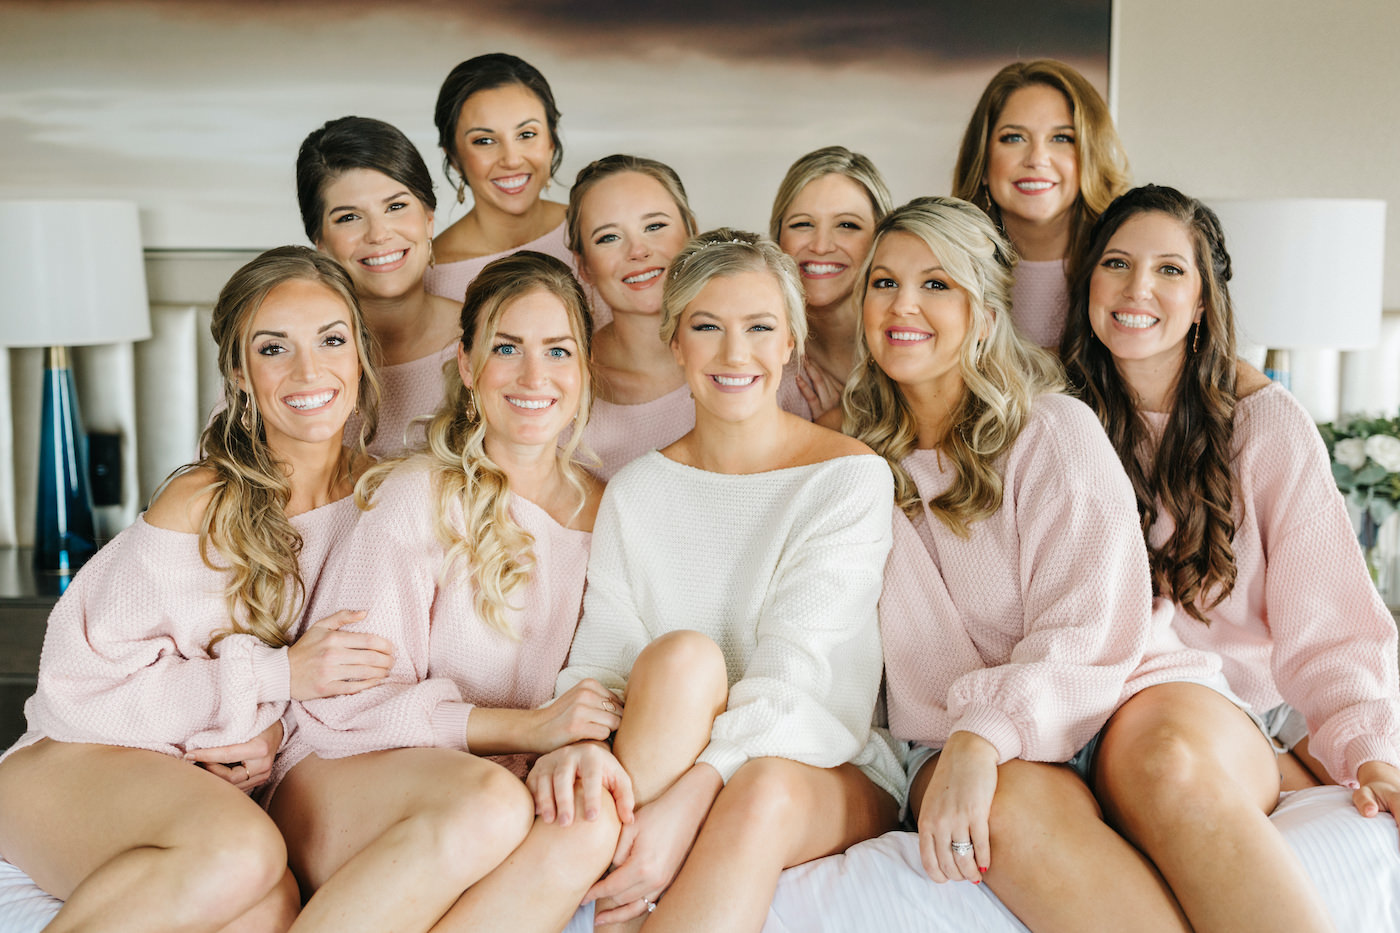 Bride and Bridesmaids Getting Ready in Blush Pink Pajamas | Michele Renee the Studio